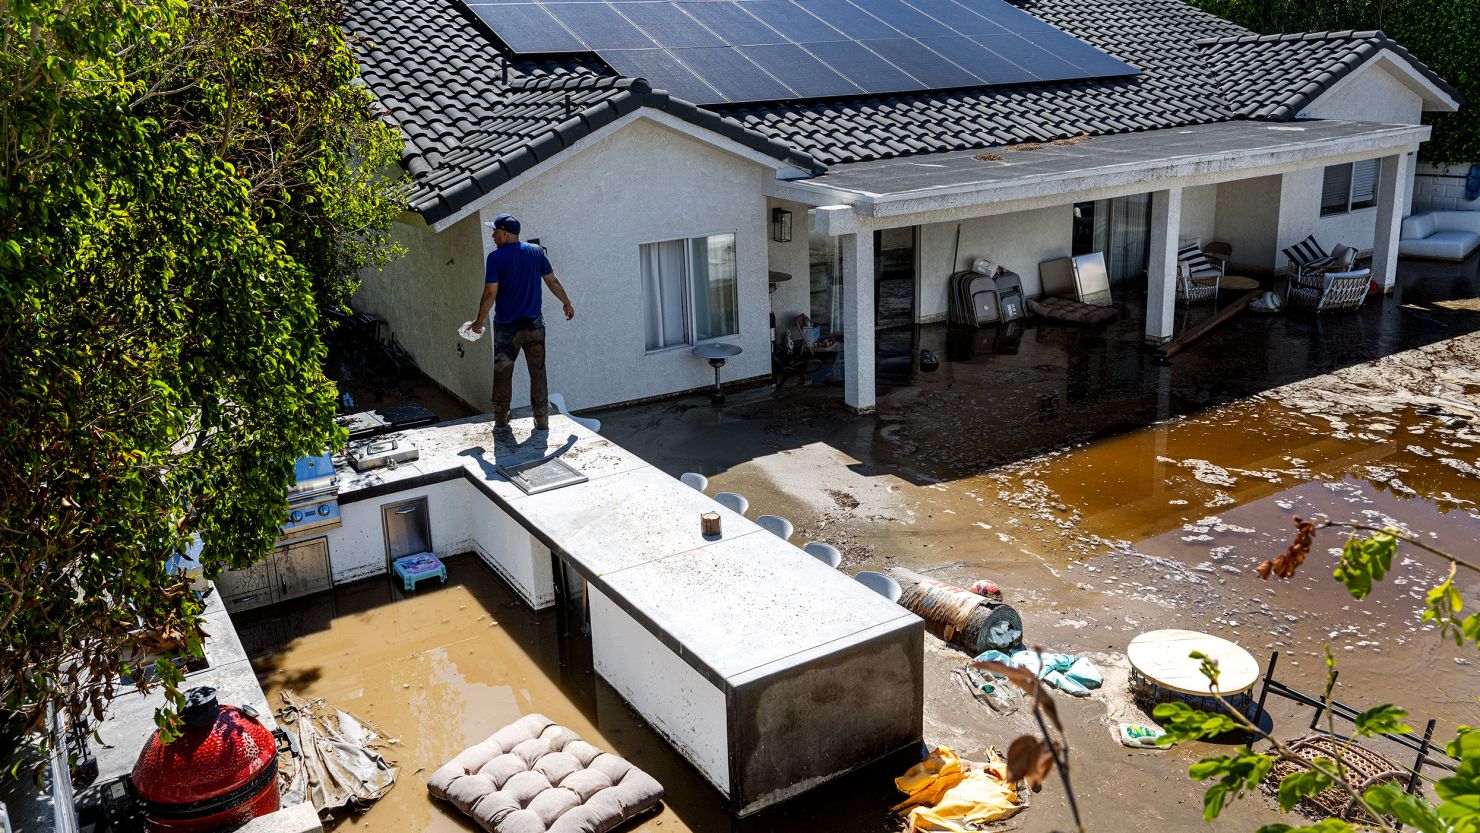 CATHEDRAL CITY, CA  - AUGUST 21, 2023: Nick Rodriguez stands on top of an outdoor barbecue seating area  at his brother's flooded backyard from the remnants of tropical storm Hilary on August 21, 2023 in Cathedral City, California. The inside of the house has 18 inches of flood water. "The water came into the house about midnight full throttle, Rick Figueroa said. He and his family hunkered down in one room until sunrise. Unable to escape out their front door Figueroa's wife Dawn and daughter Ella escaped over a neighbor's back wall Monday morning.(Gina Ferazzi / Los Angeles Times via Getty Images)